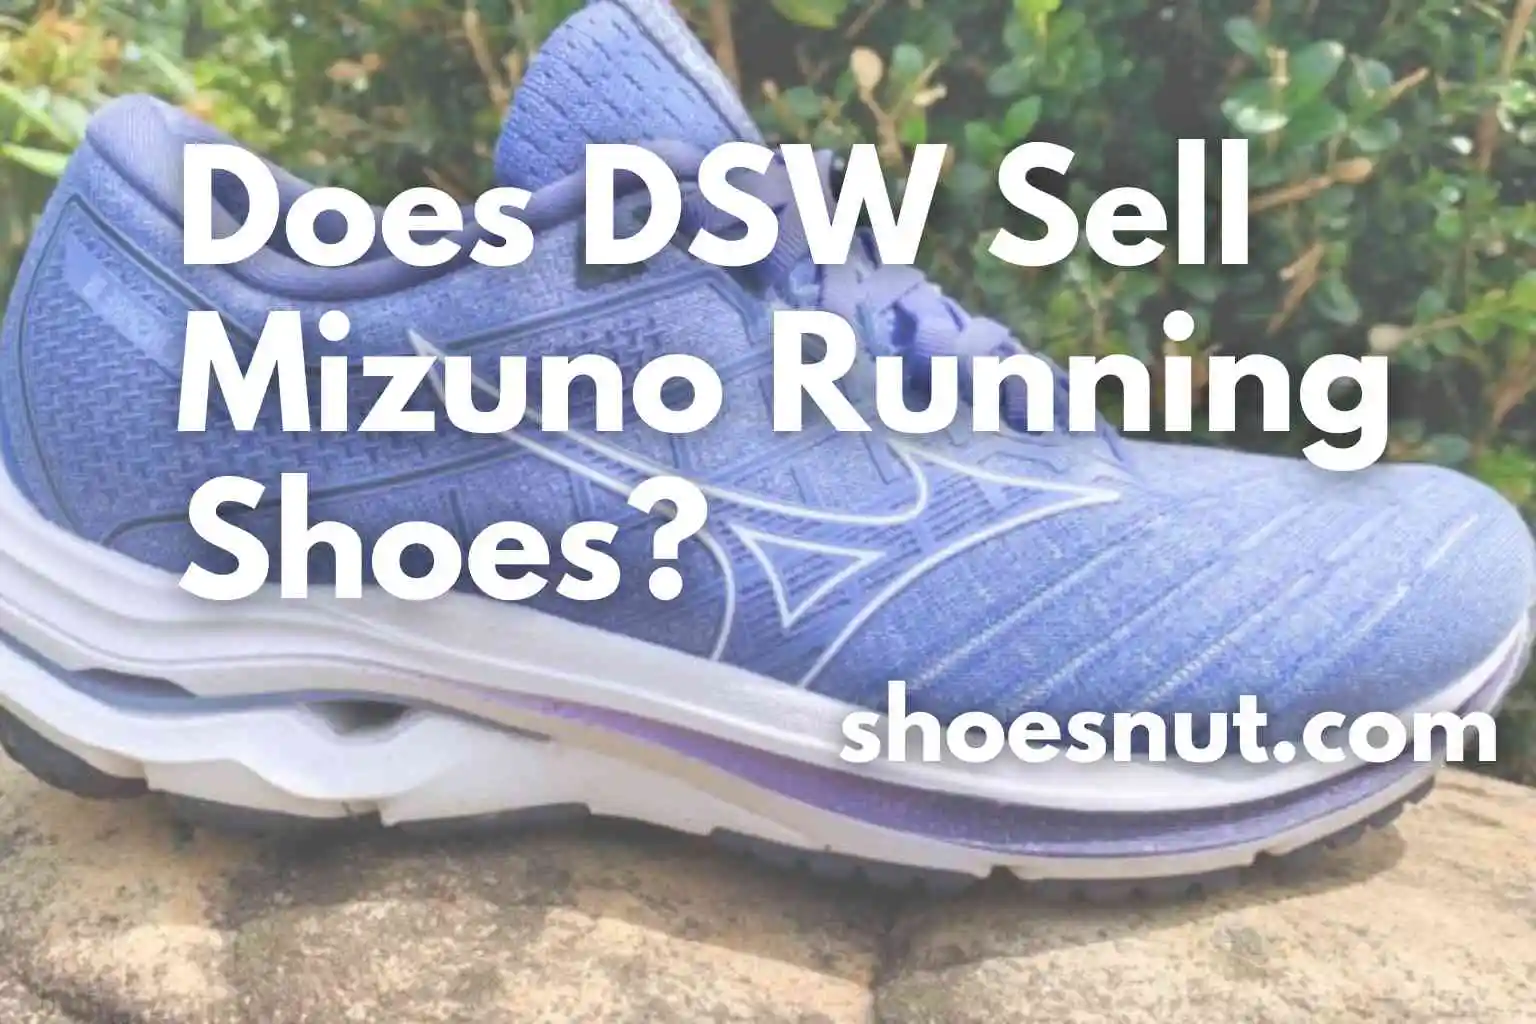 Does DSW Sell Mizuno Running Shoes?